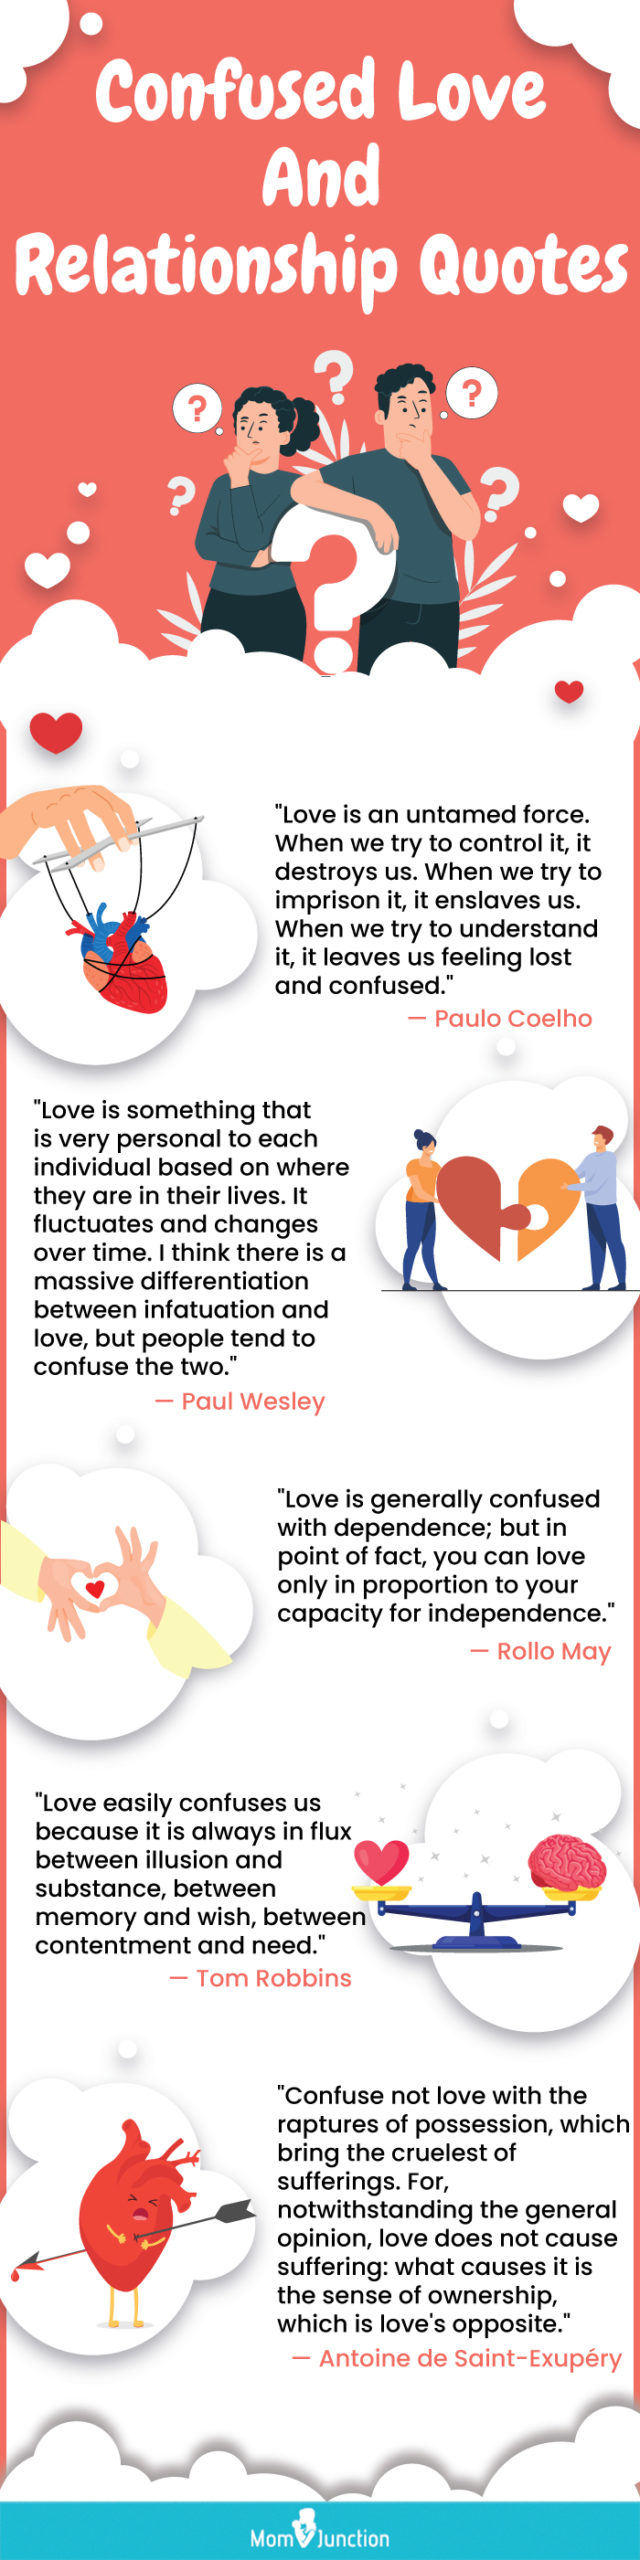 confused love and relationship quotes (infographic)